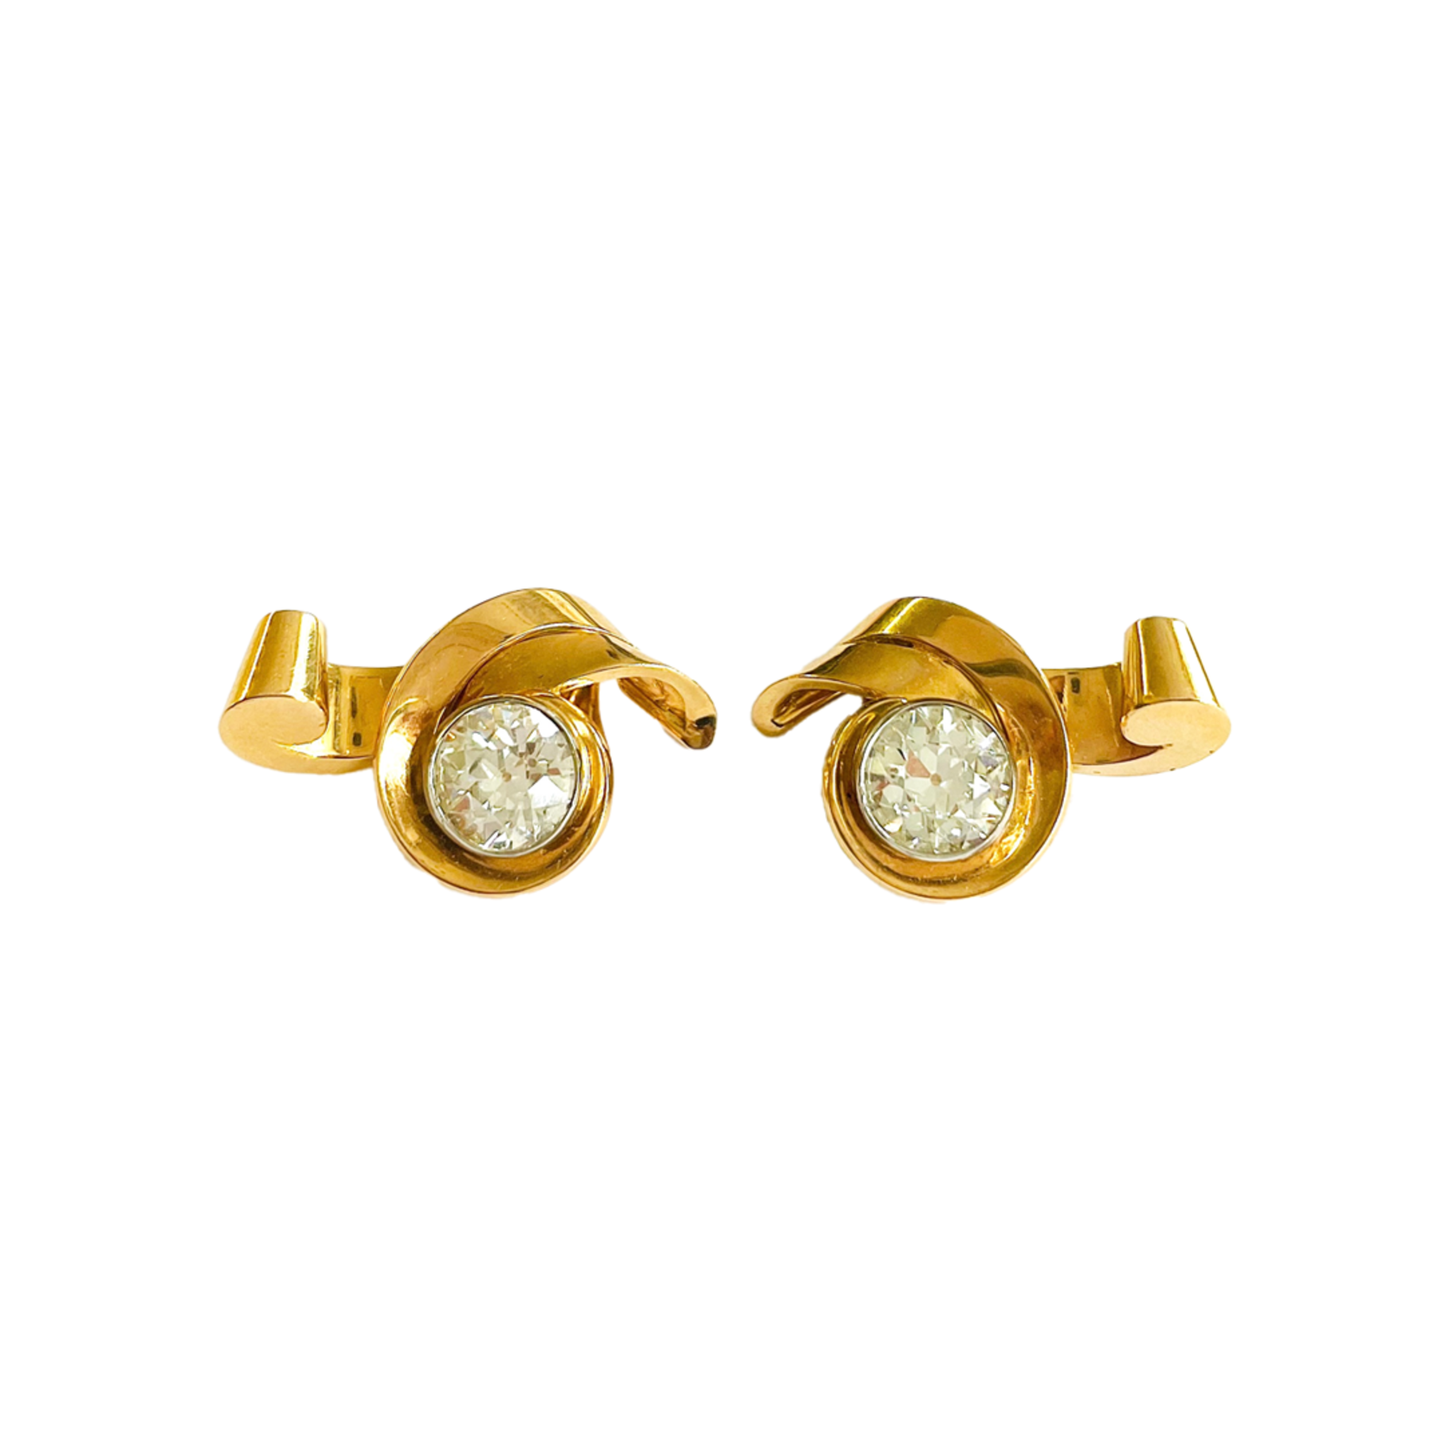 French 1950s Platinum & 18KT Yellow Gold Diamond Earrings front